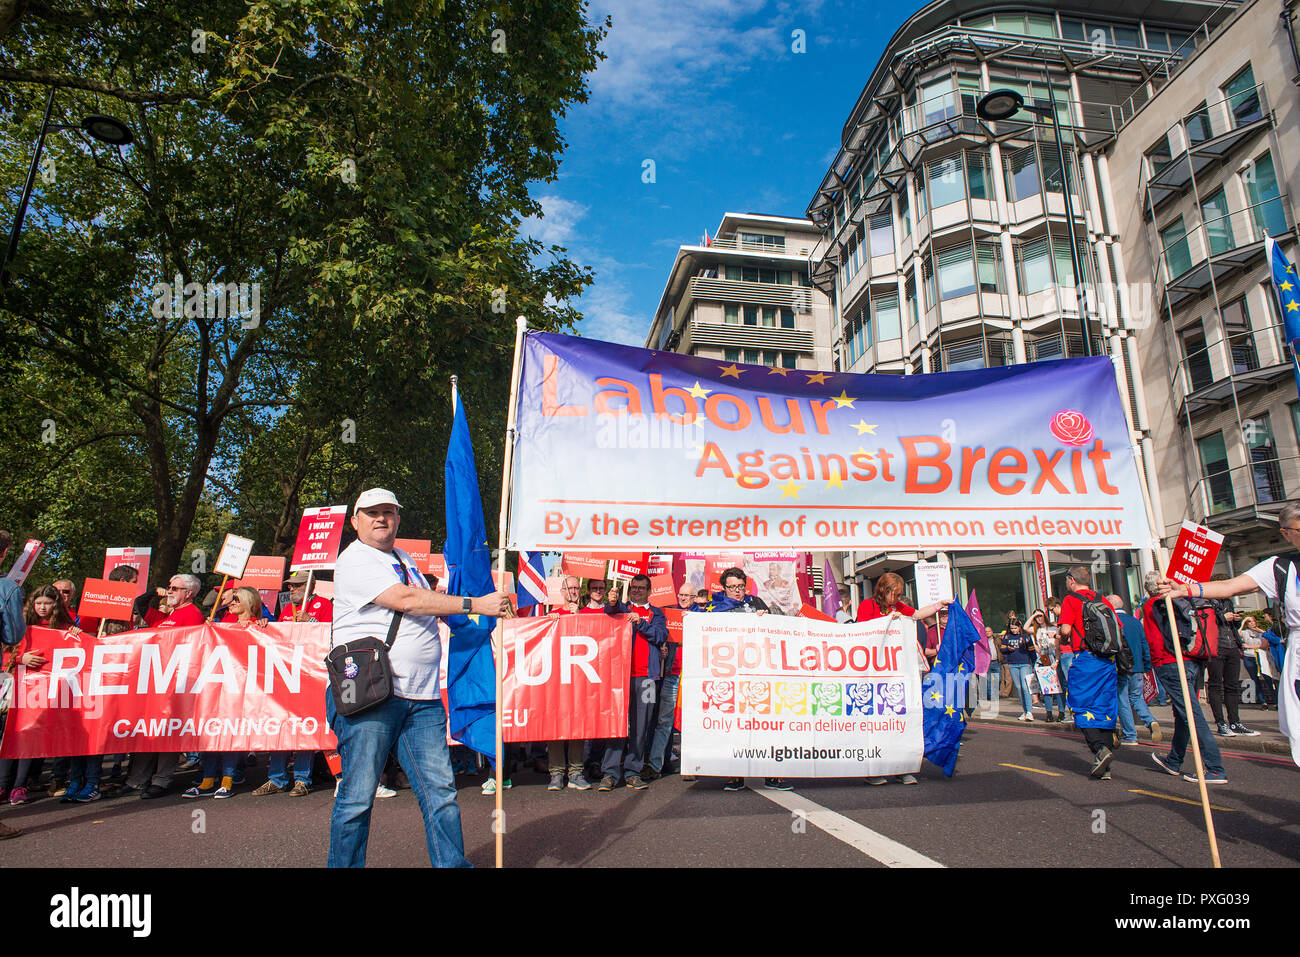 Remain campaign protesters at the People's Vote March, demanding a vote on the final Brexit deal,thousands marched through central London to be heard. Stock Photo